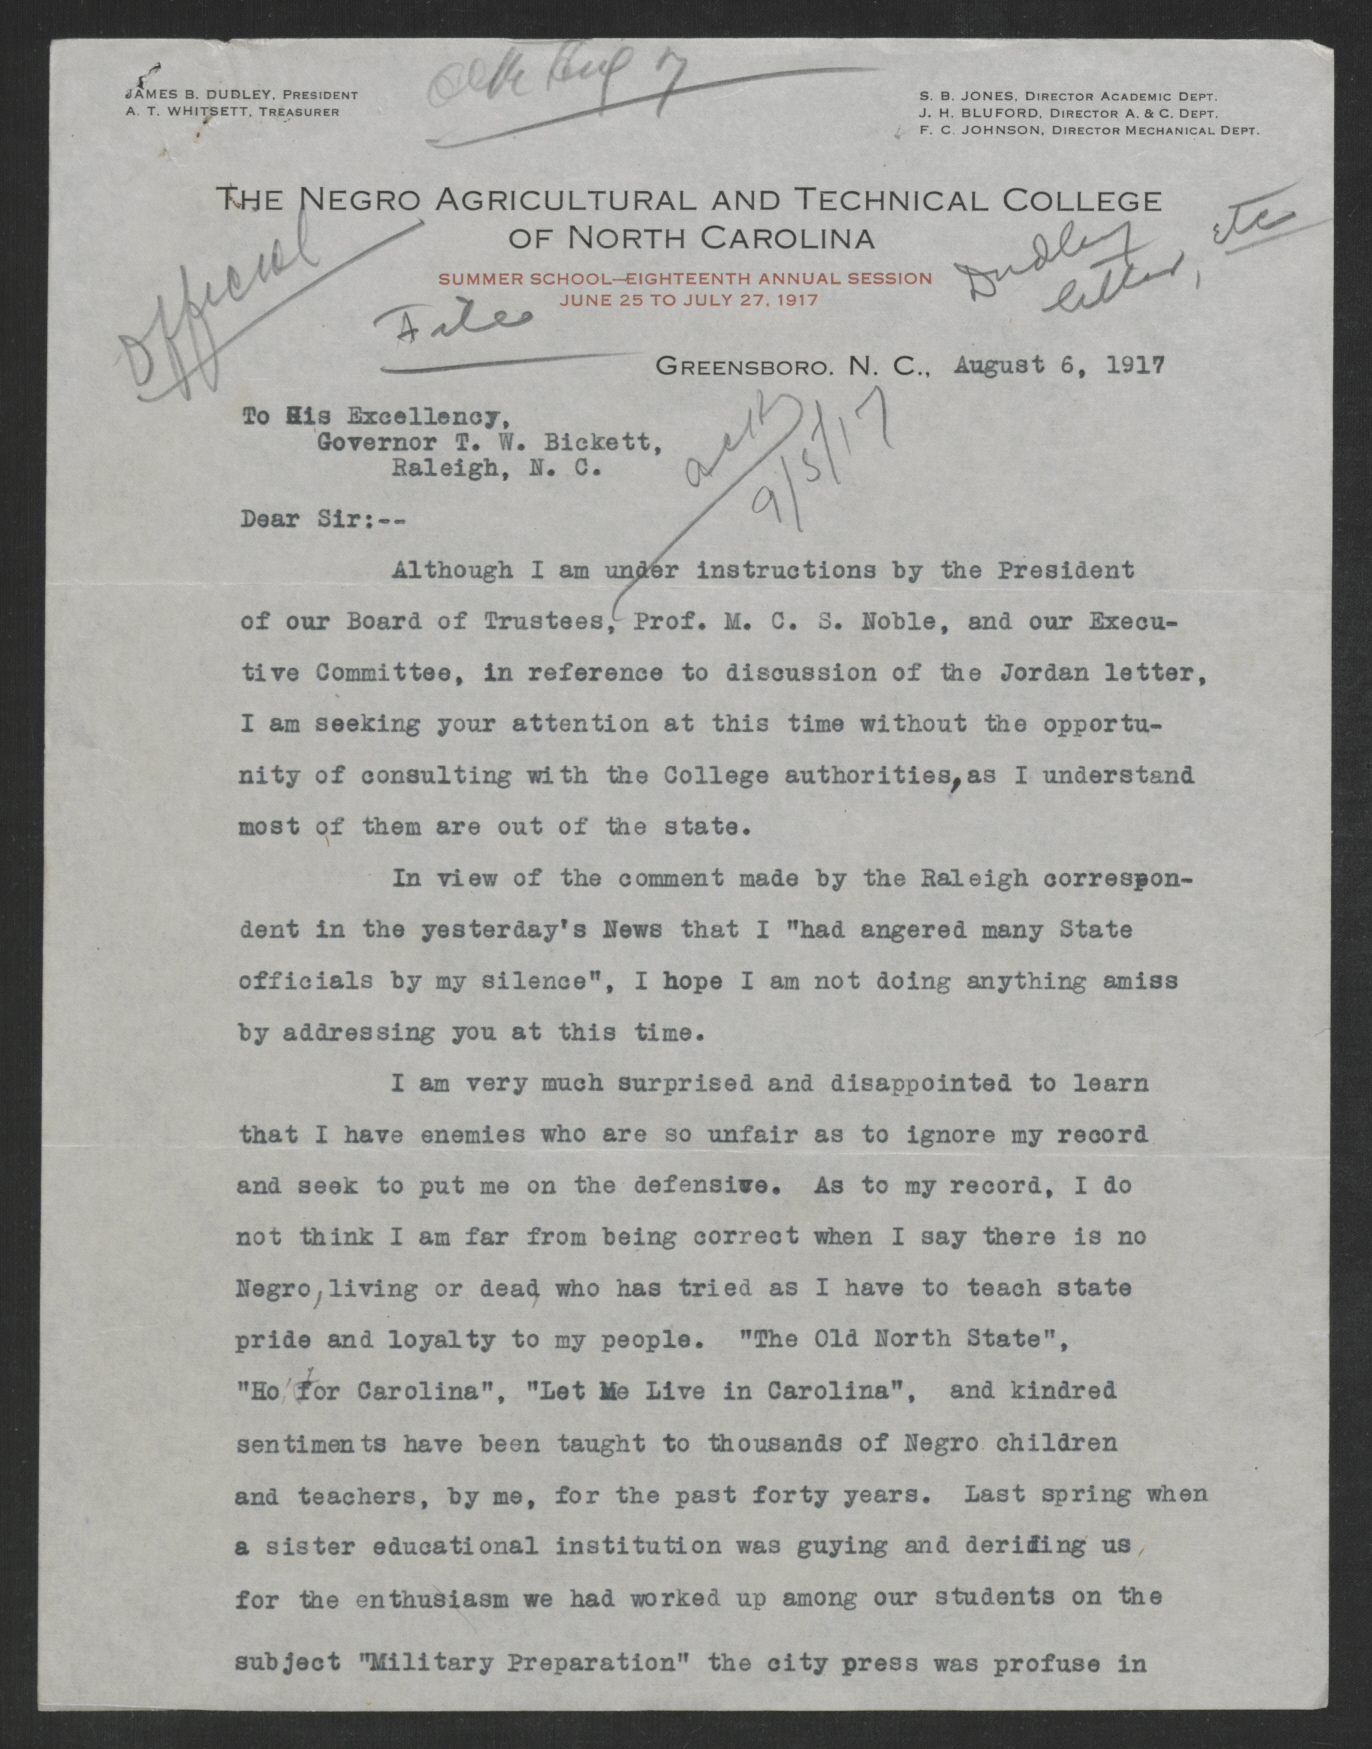 Letter from James B. Dudley to Gov. Bickett, August 6, 1917 - Page 1